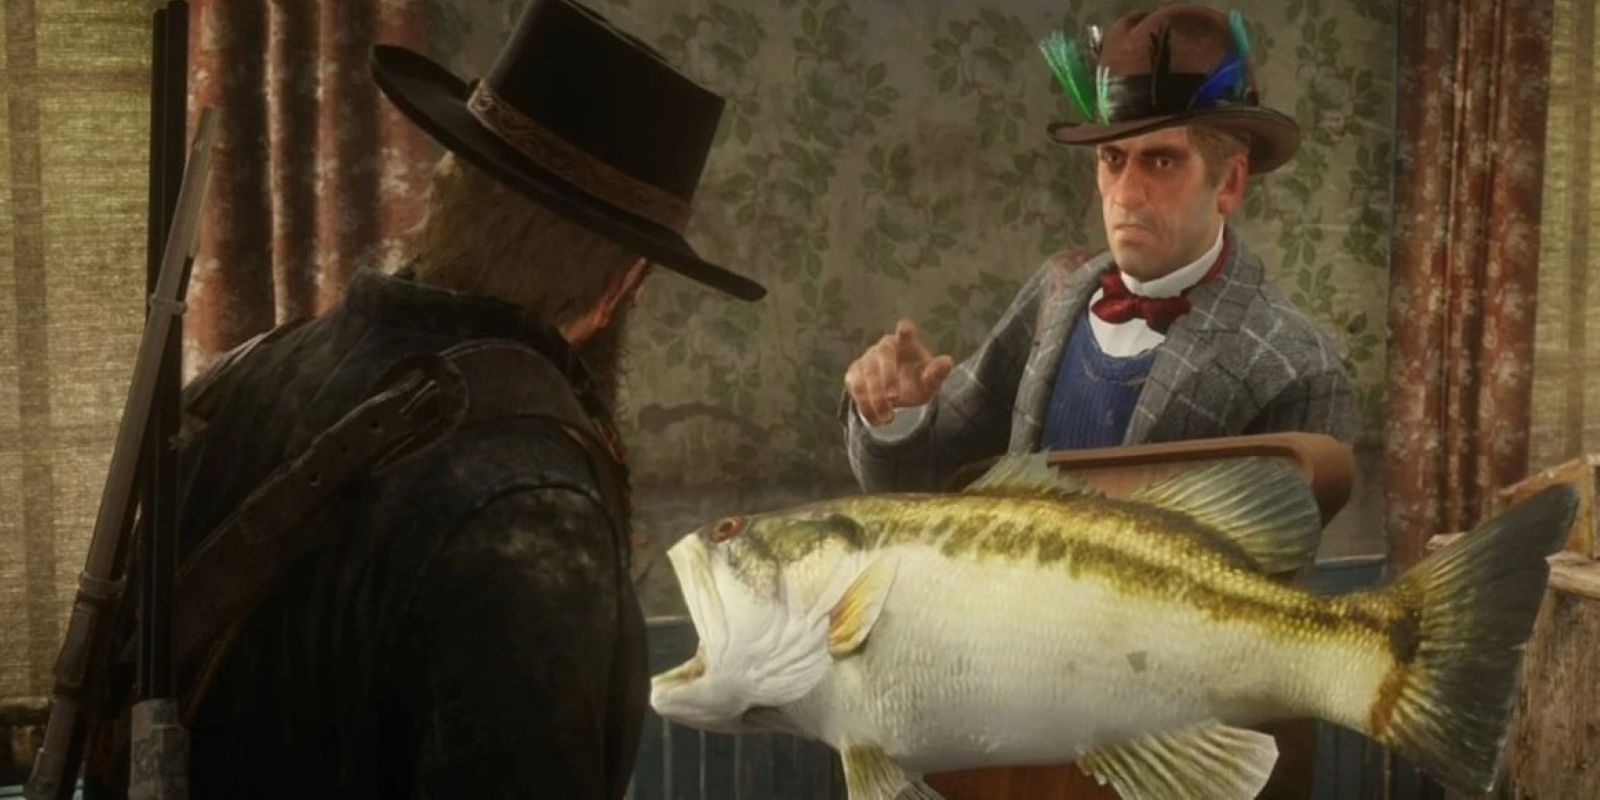 Red Dead Redemption 2: How to Unlock Fishing, Find Fish